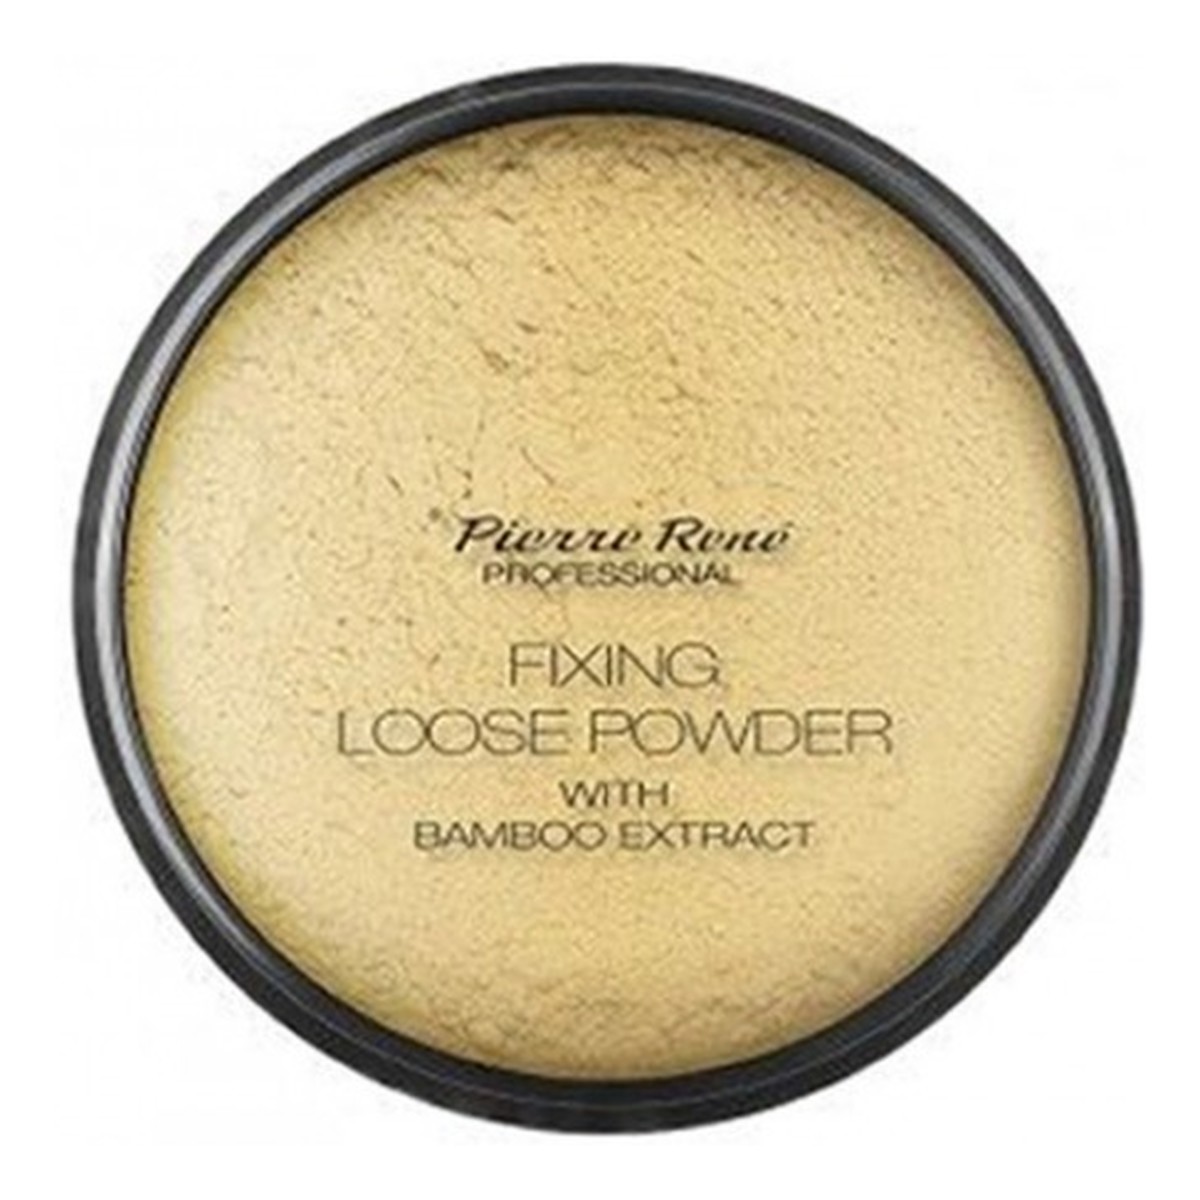 Pierre Rene Professional Fixing Loose Powder With Bamboo Extract puder sypki Bambus & Banan 12g